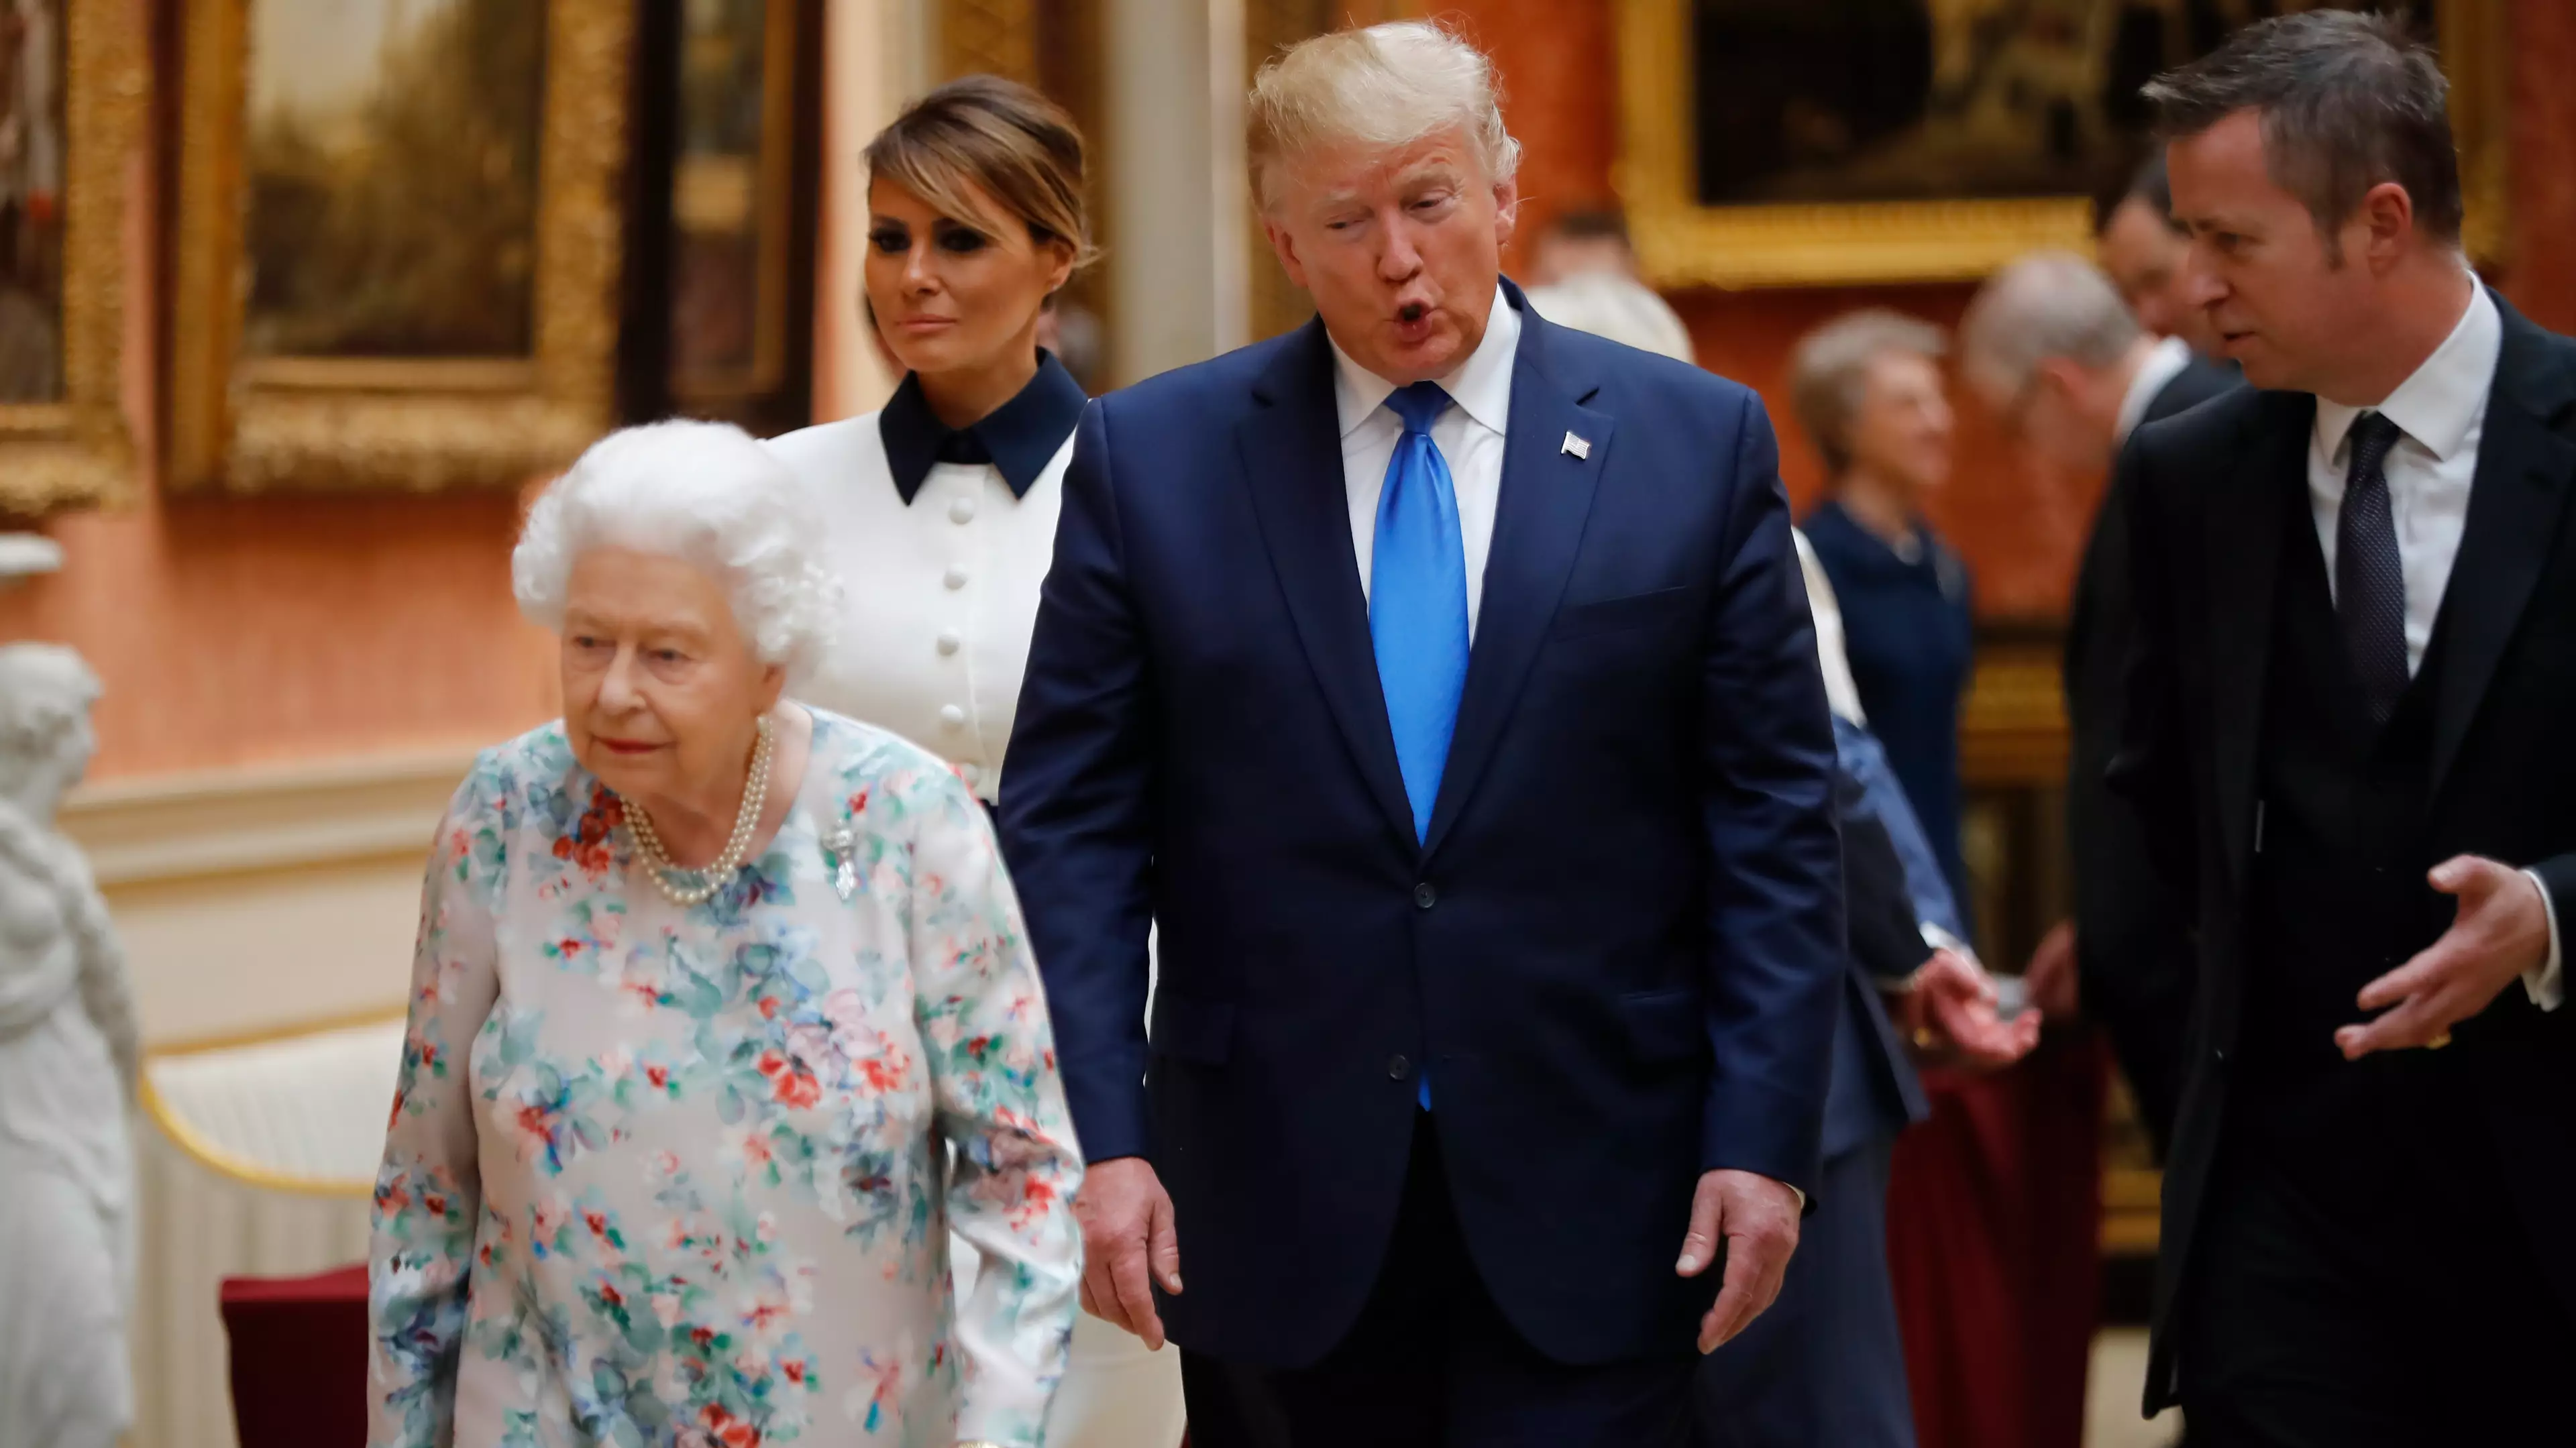 Donald Trump Appears To Break Royal Protocol And Touches The Queen